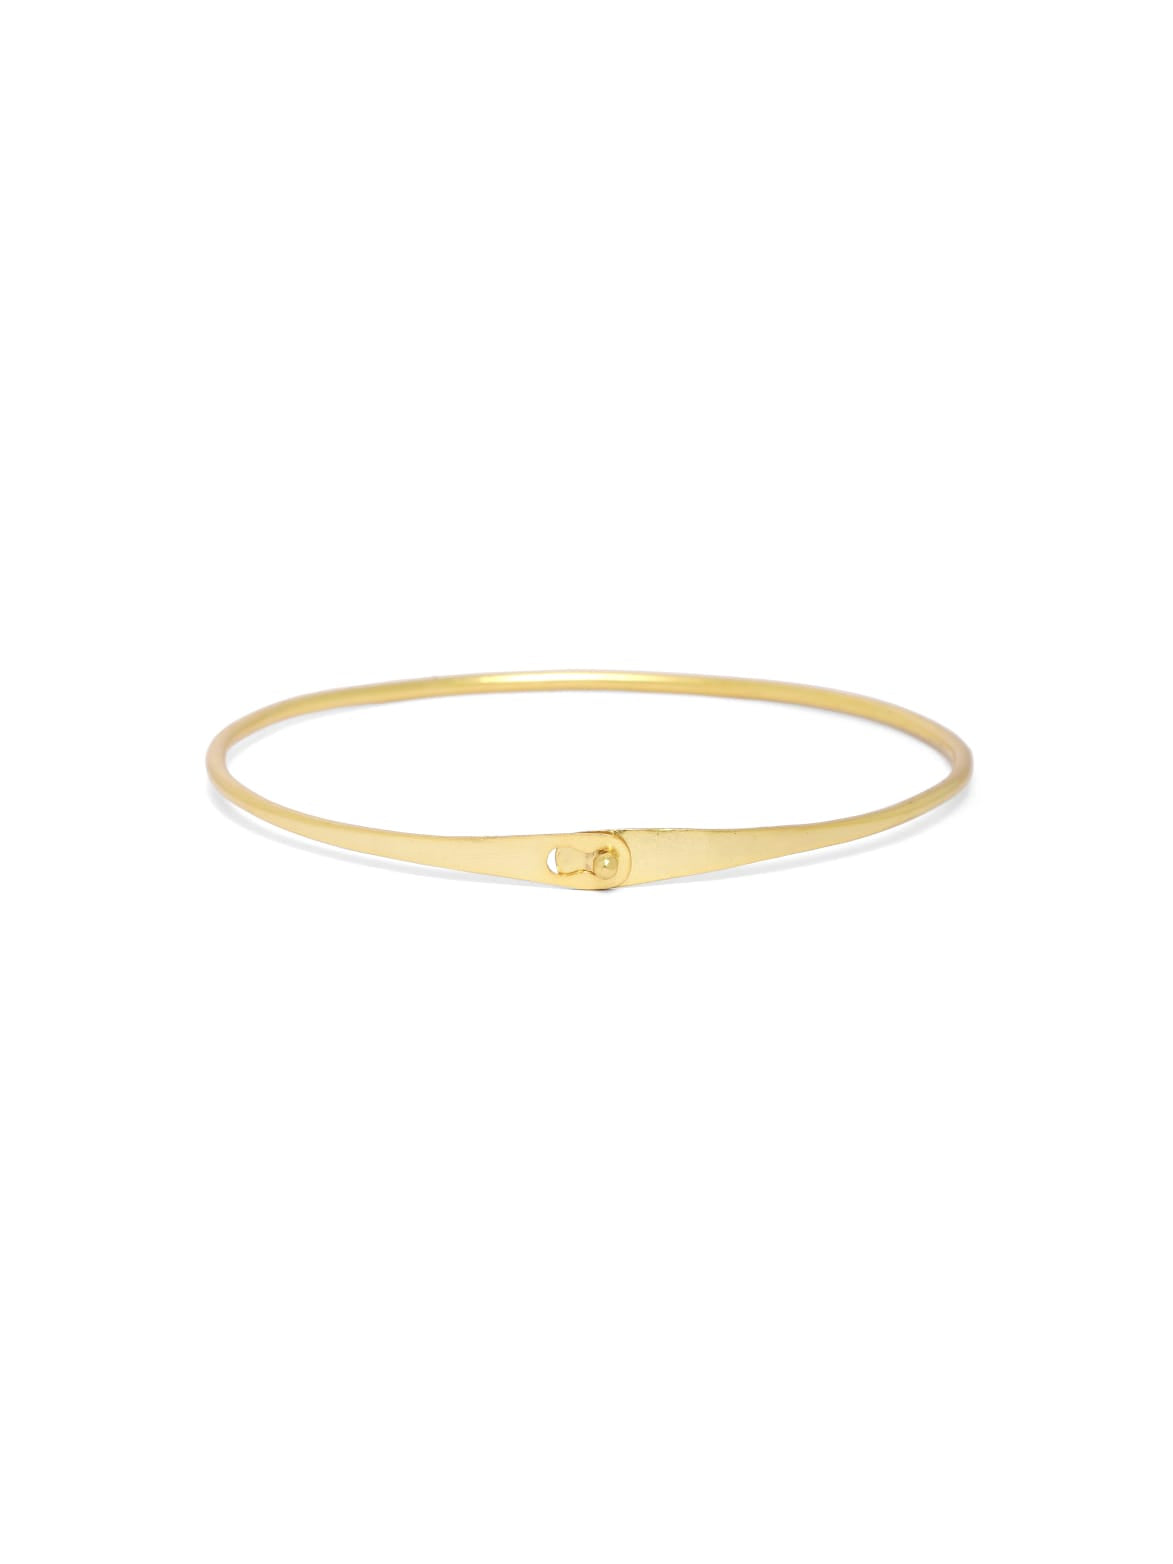 Unisex stackin hook bracelet in sterling silver with micron Gold plating.